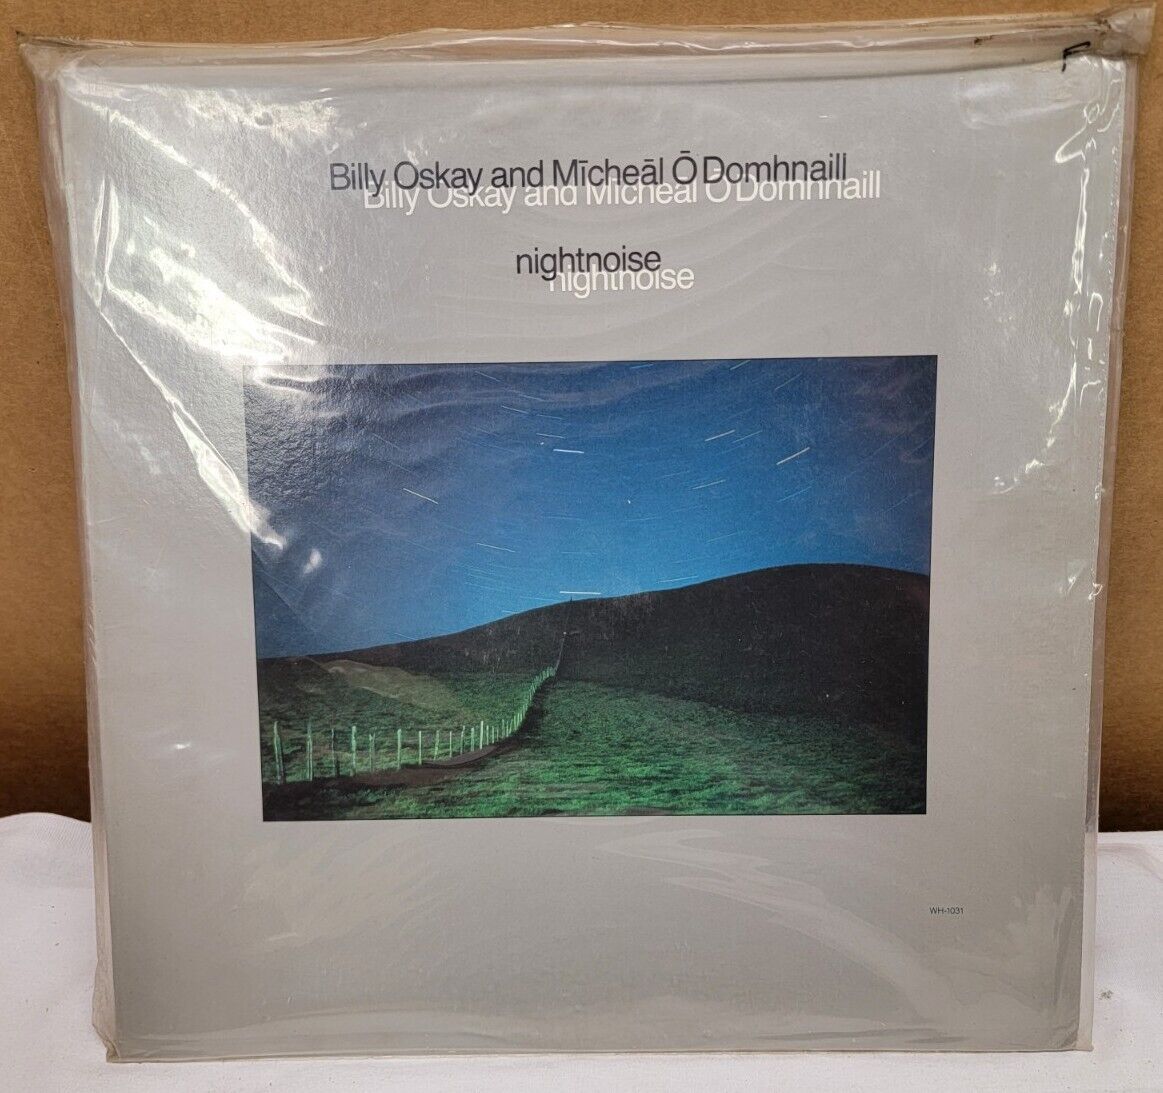 SEALED! 1984 Billy Oskay & Micheal O Domhnaill "Nightnoise" LP - Windham Hill 